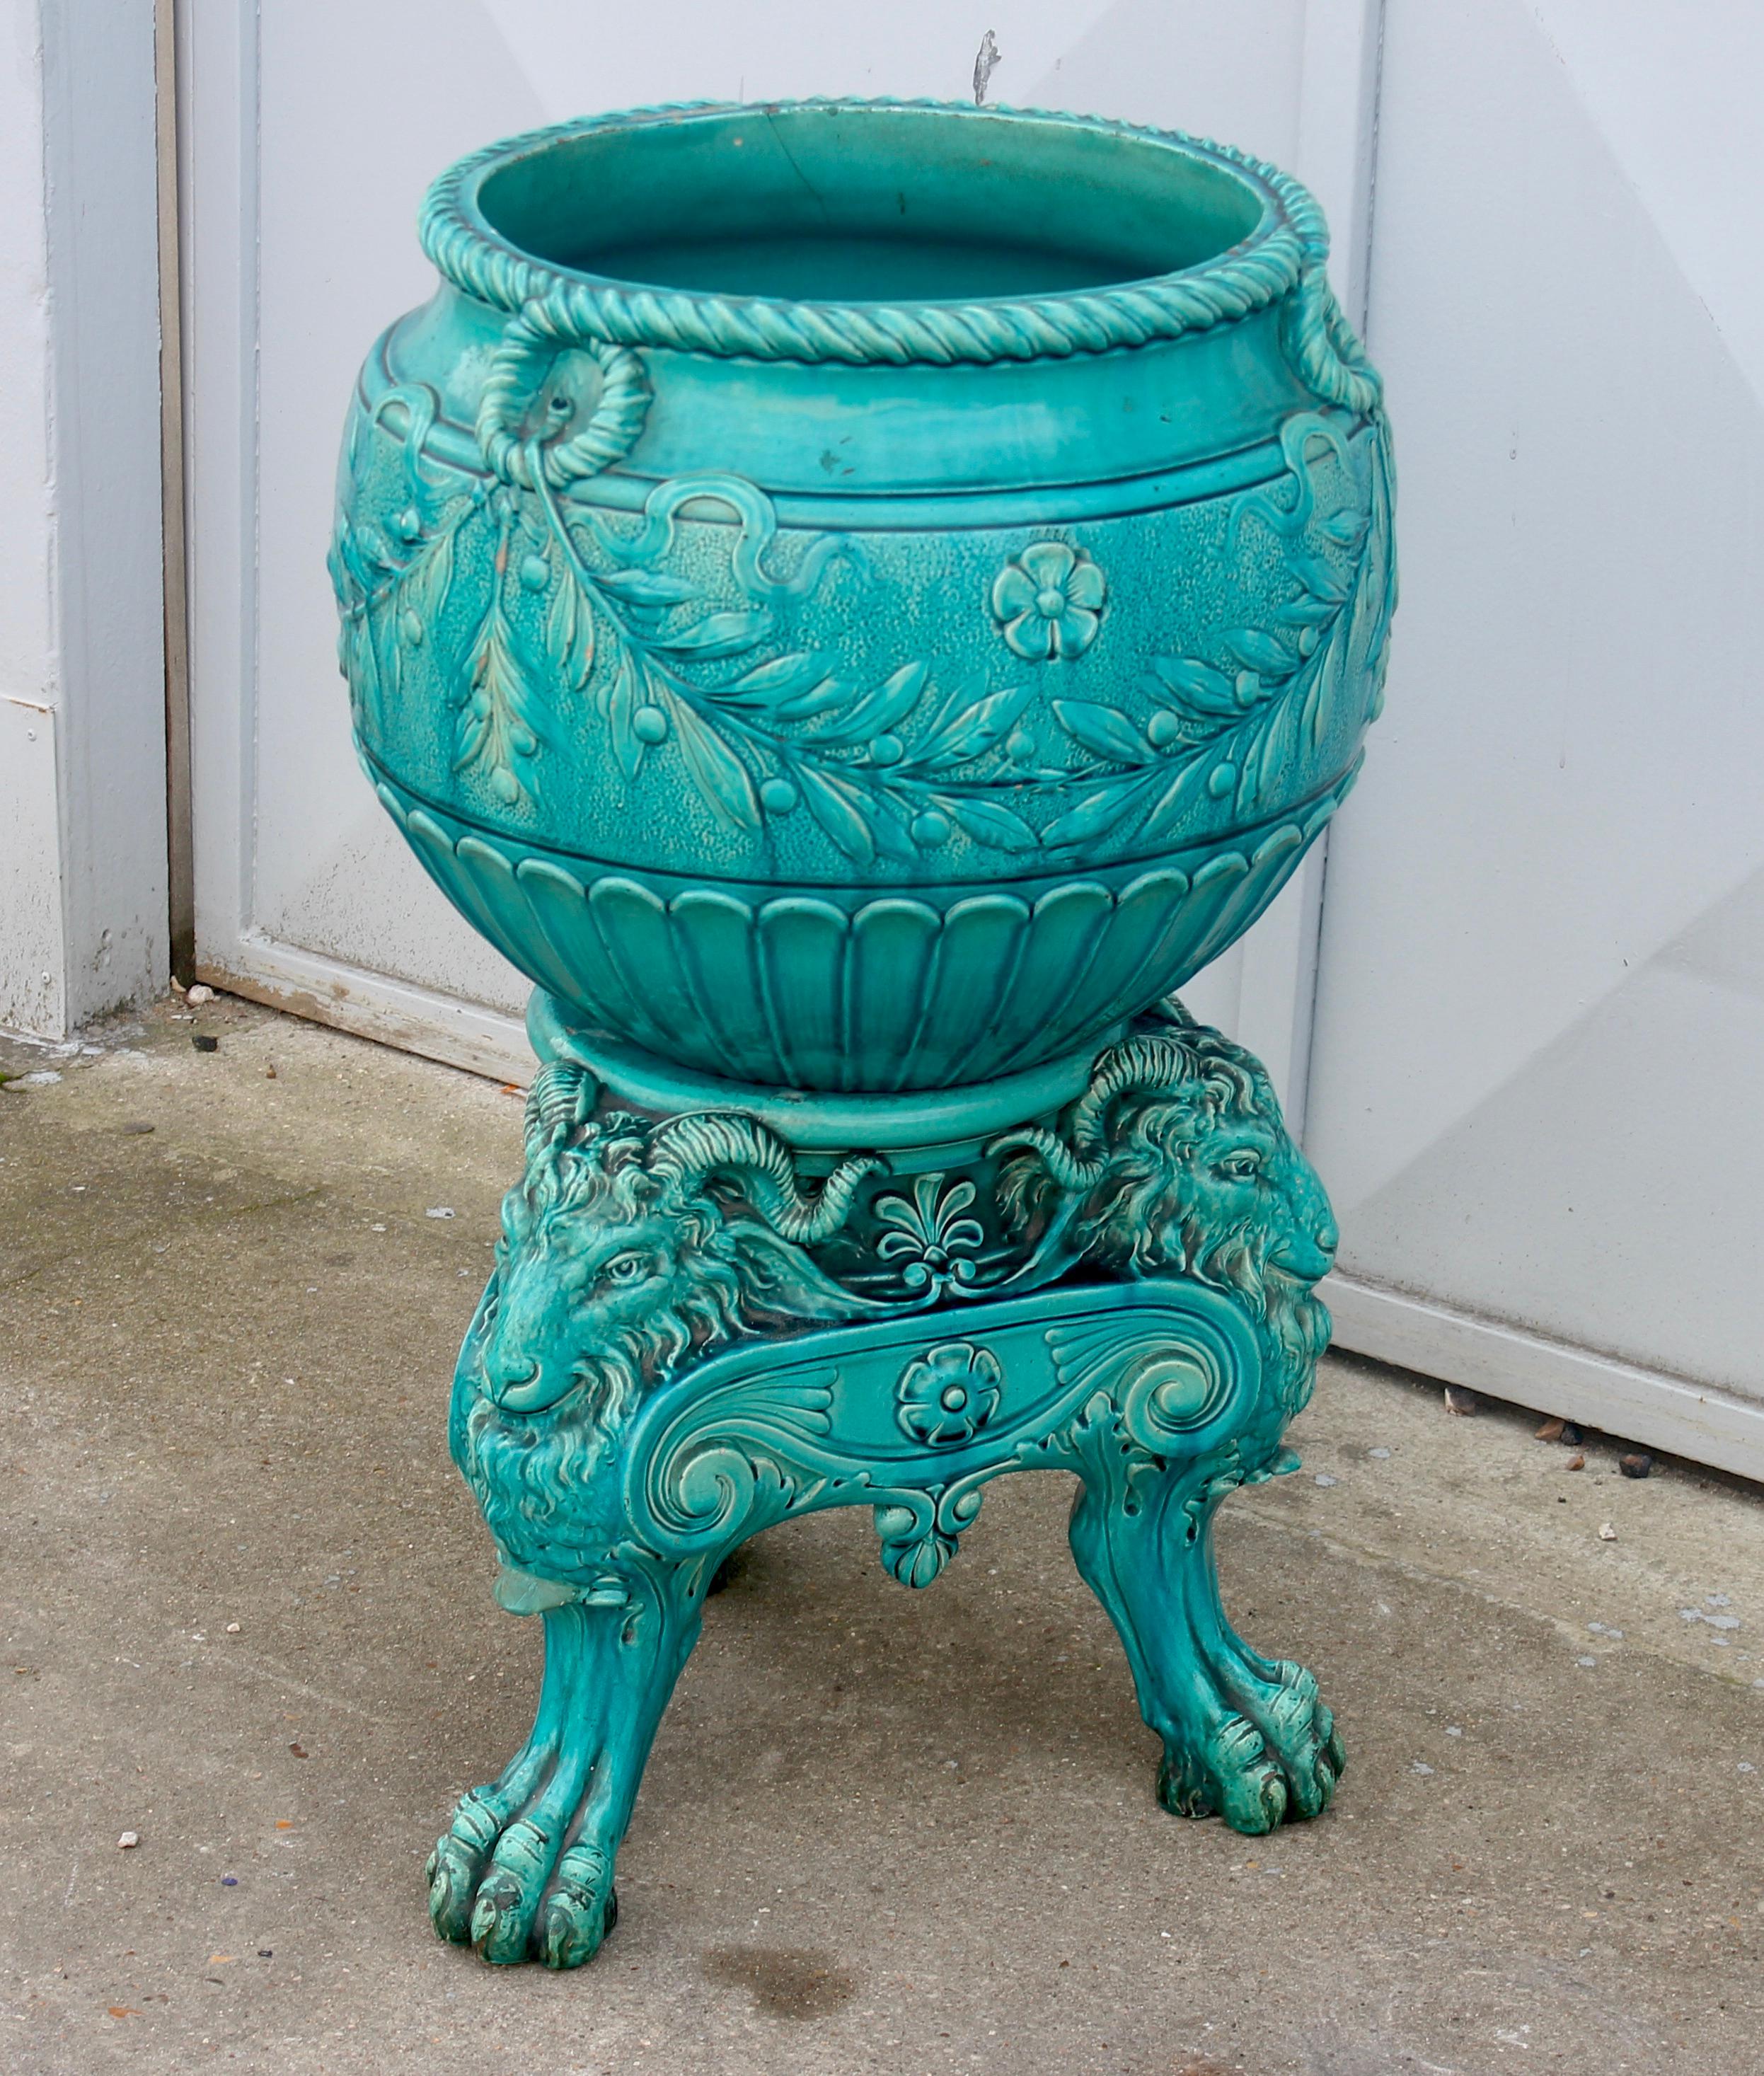 A 19th century England Burmantofts Pottery turquoise blue Faïence jardinière and stand set
cachepot in earthenware with blue-turquoise glaze decorated with a frieze of laurels and godrons. 
It rests on its tripod pedestal with heads and claws of